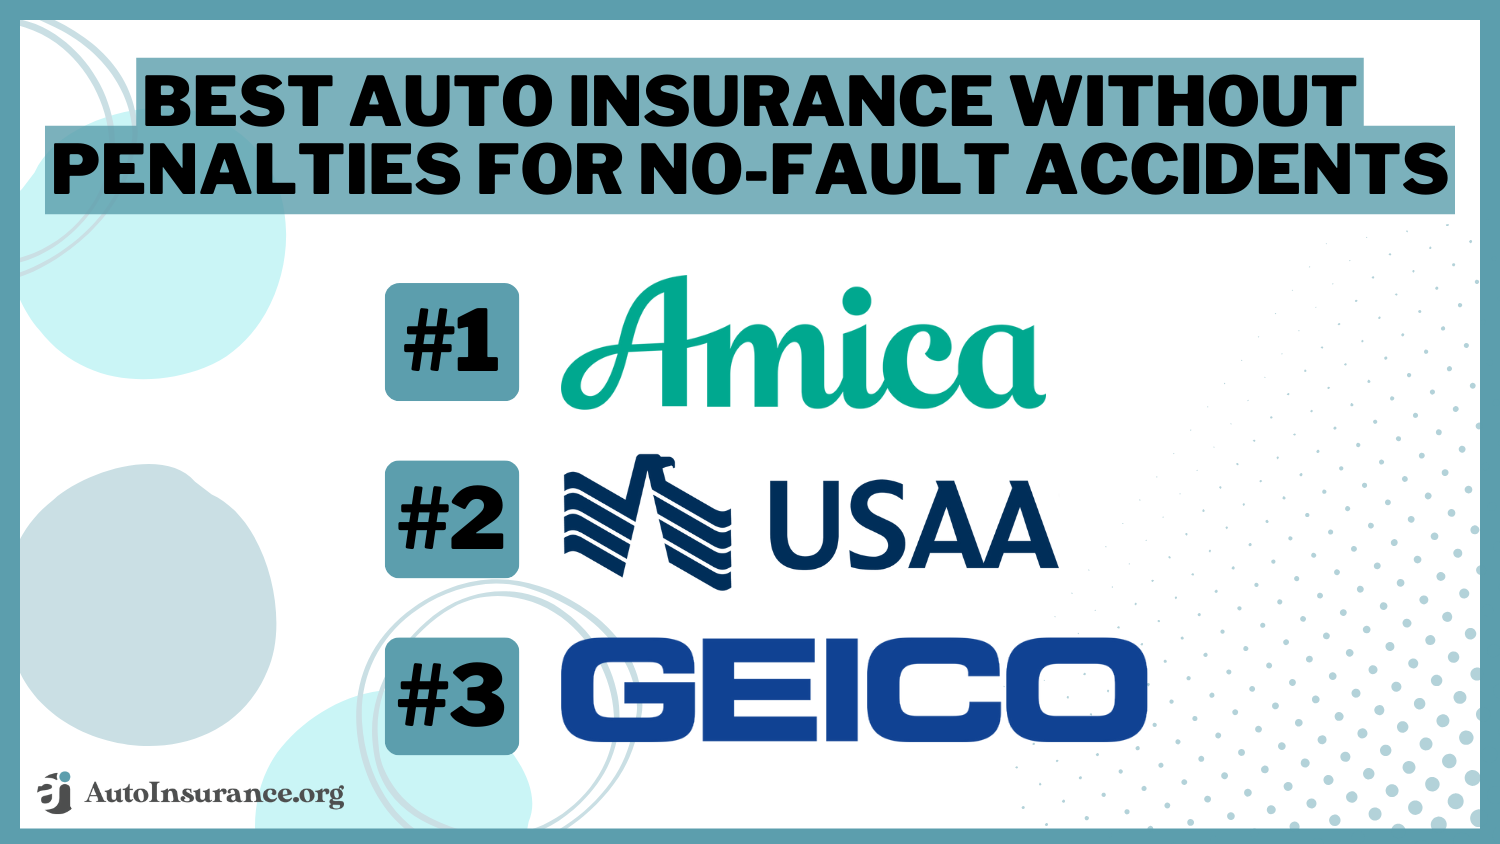 Best Auto Insurance Without Penalties For No-Fault Accidents: Amica, USAA, Geico